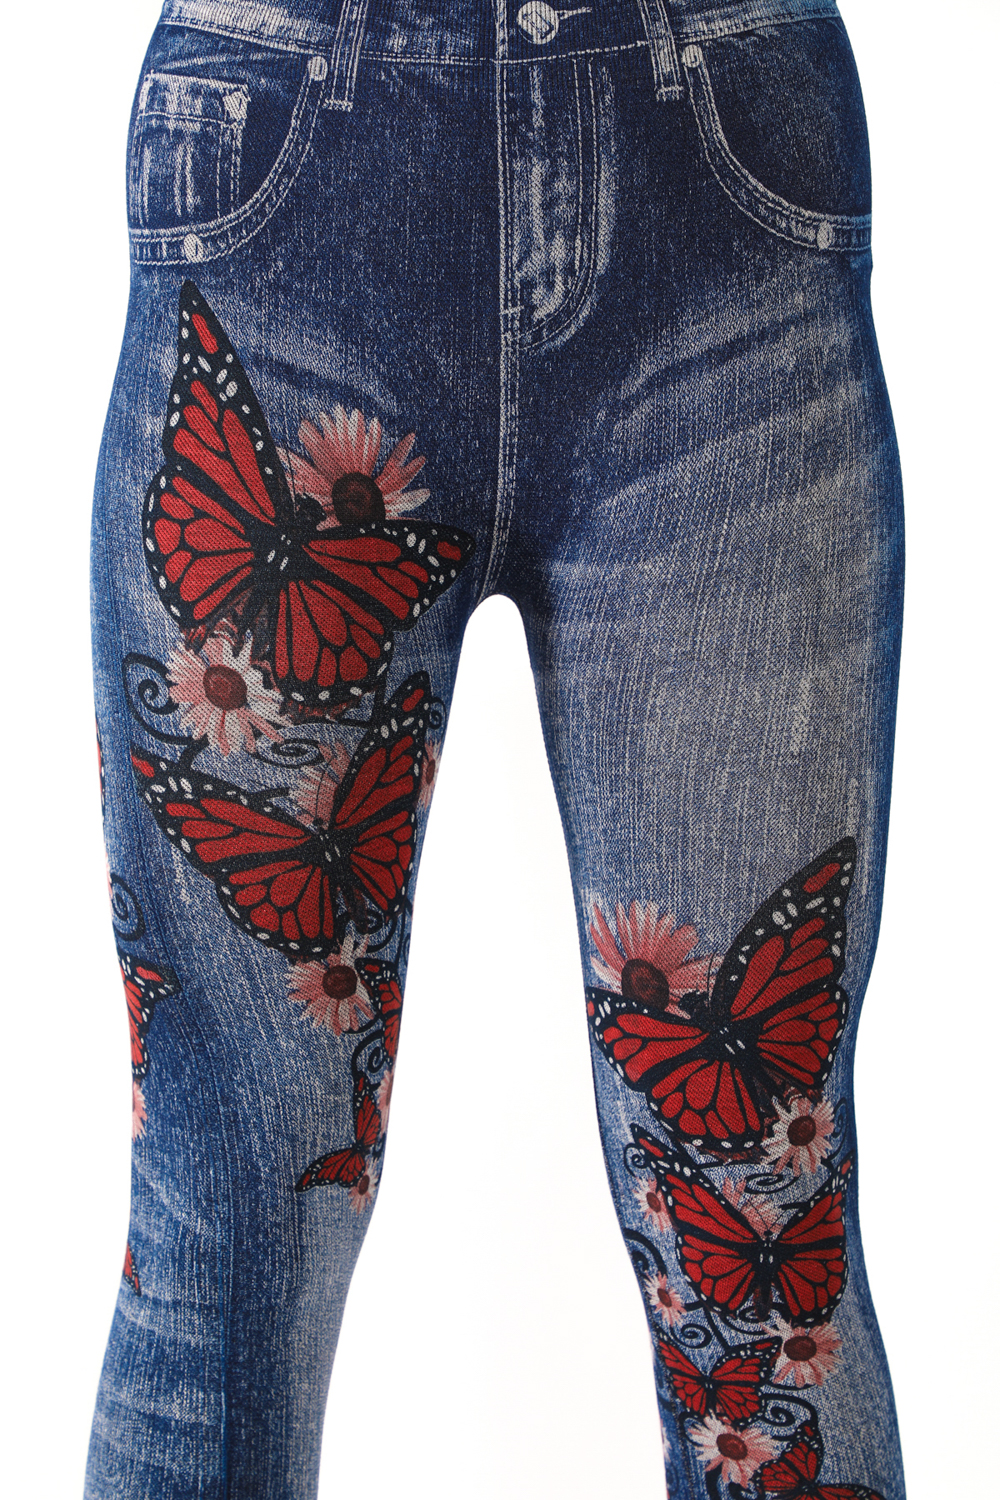 Denim Leggings with Butterflies and Floral Pattern